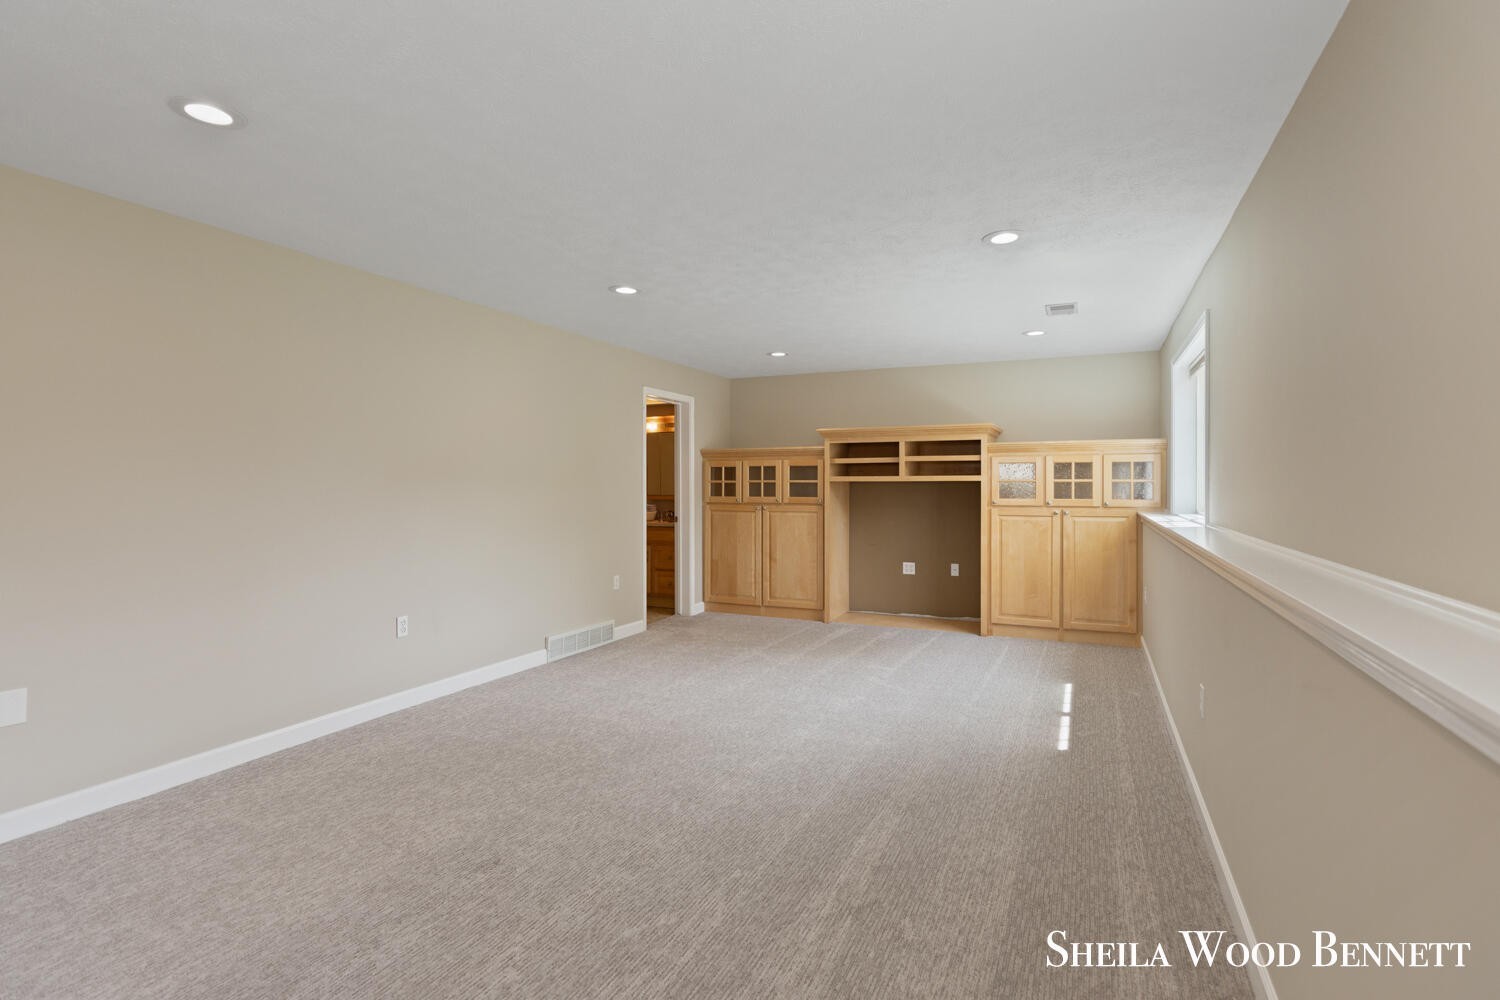 38. 4164 Pintail Court